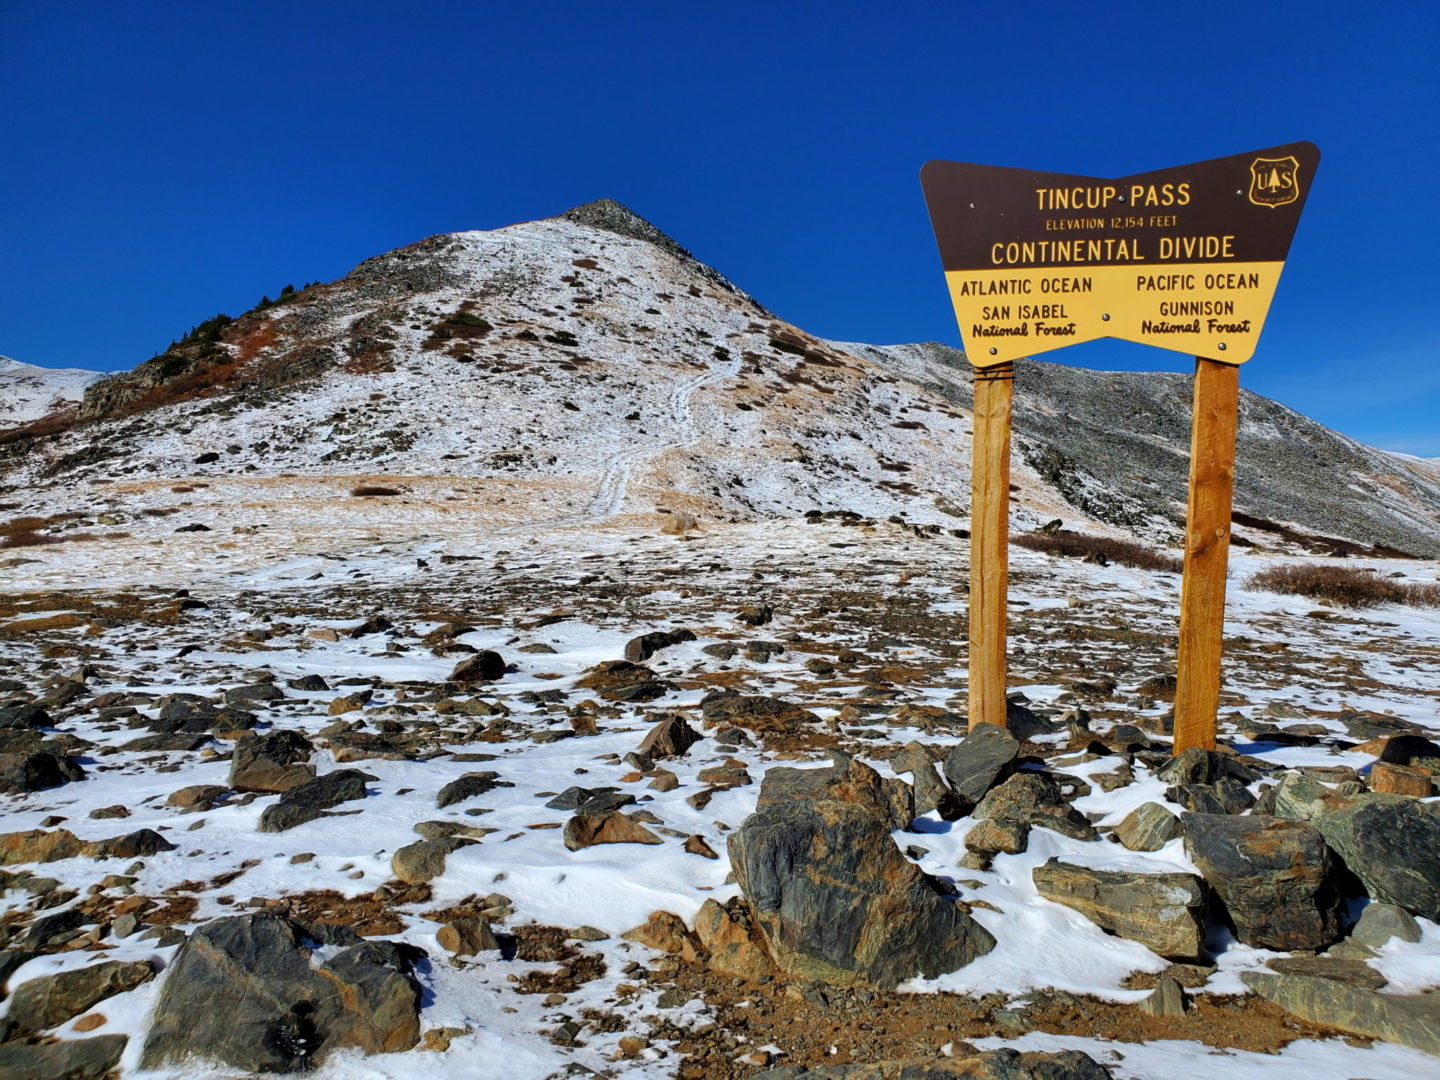 Tincup Pass 12,154' - part of the Continental Divide Trail (CDT)